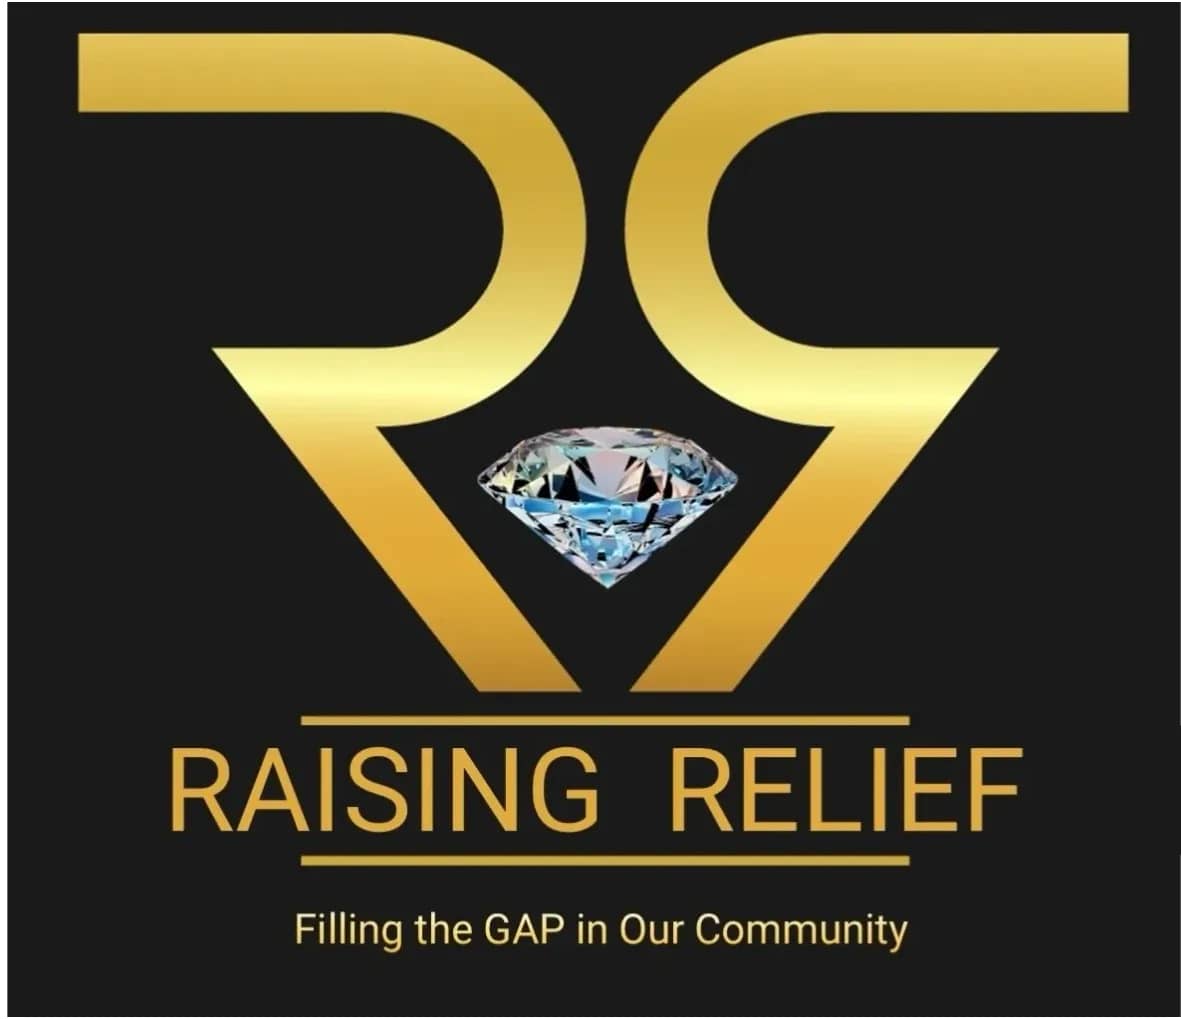 Raising Relief – Filling the GAP for Our Community